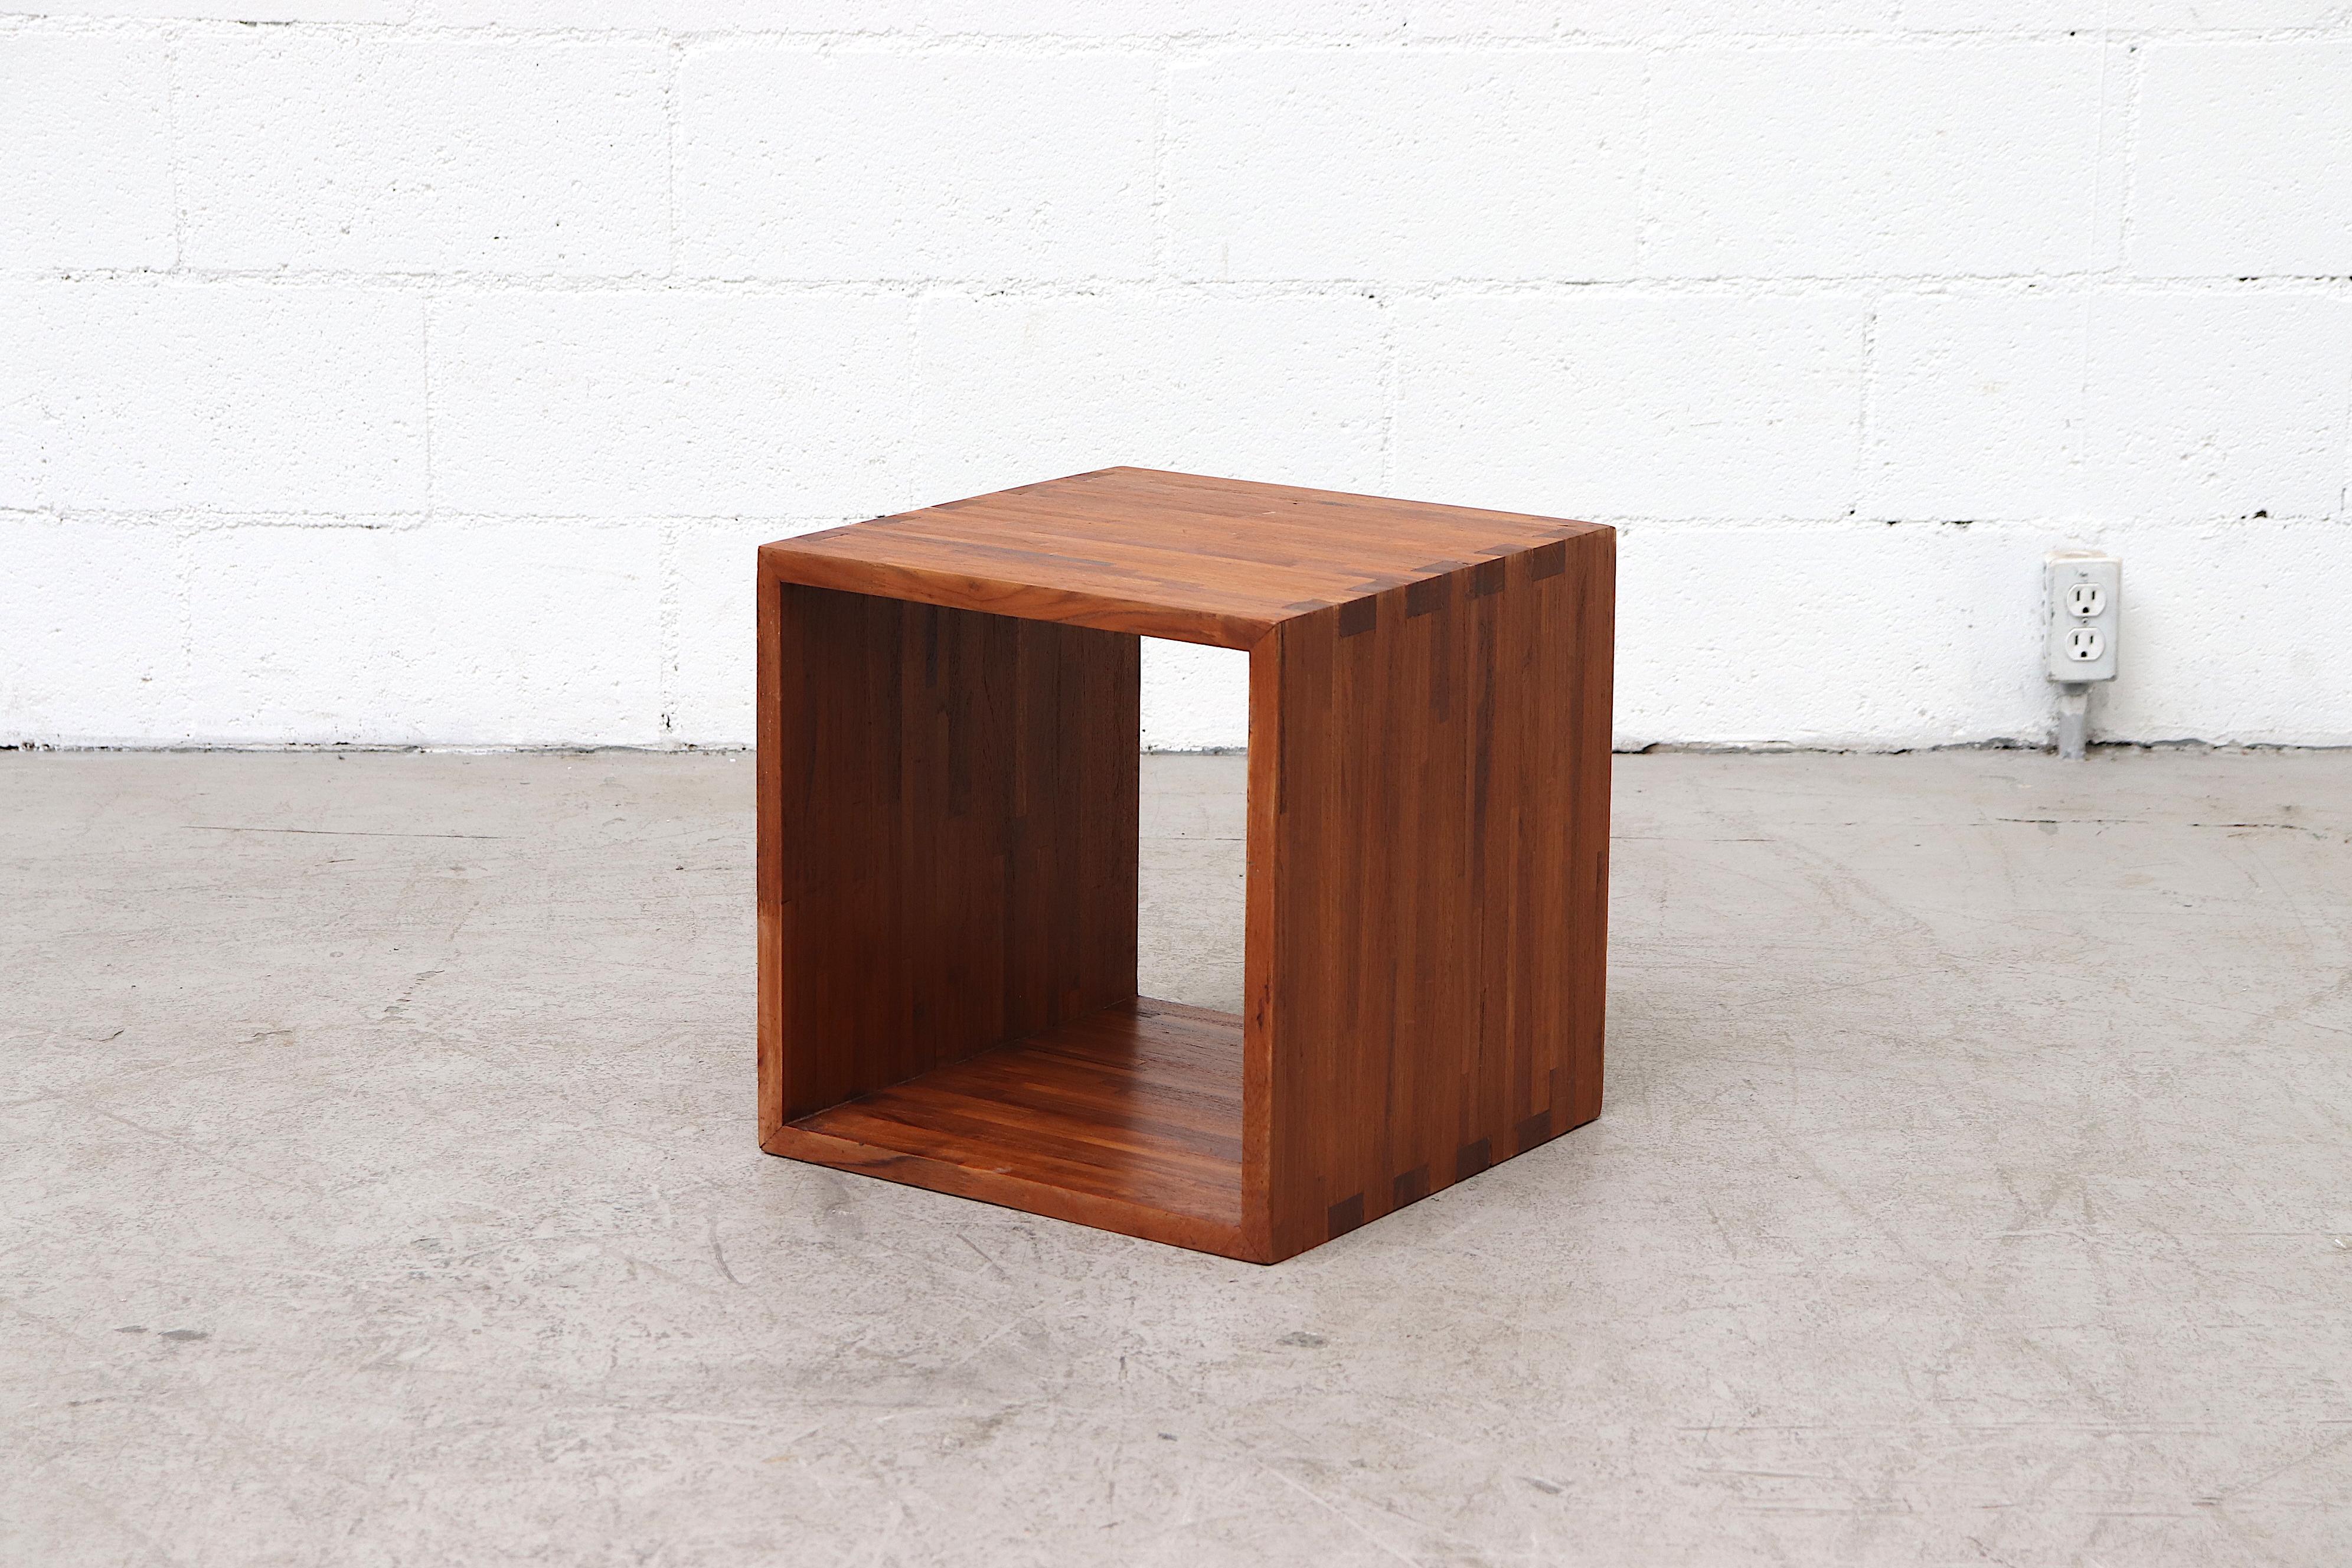 Beautiful and simplistically designed Ate Van Apeldoorn style cube pine cube side table. Lightly refinished in original condition with wear and scratching consistent with age and use.